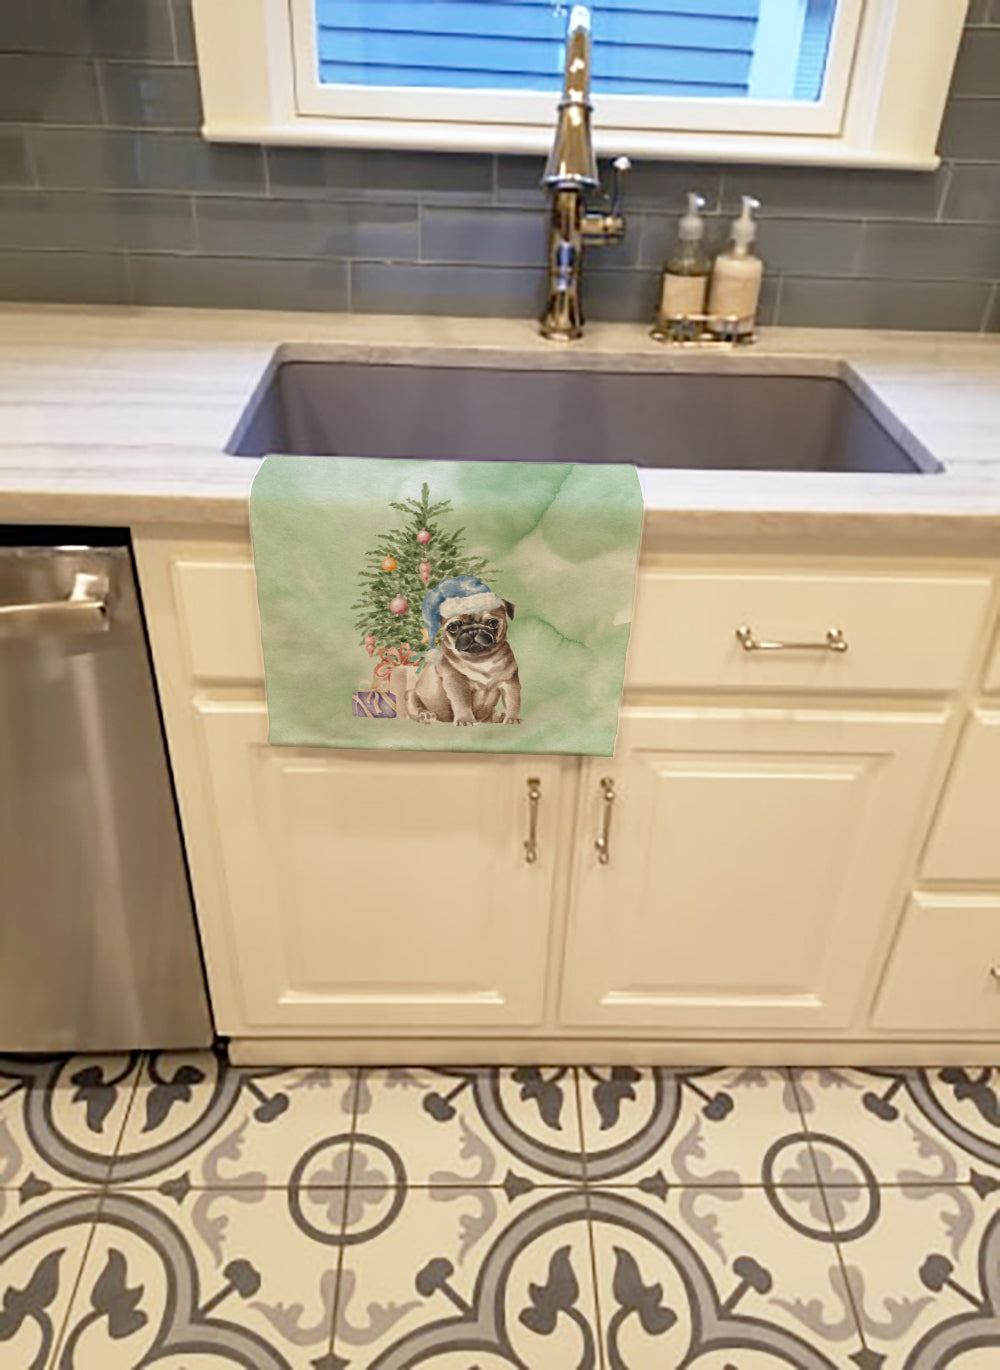 Buy this Christmas Fawn Pug Puppy Kitchen Towel